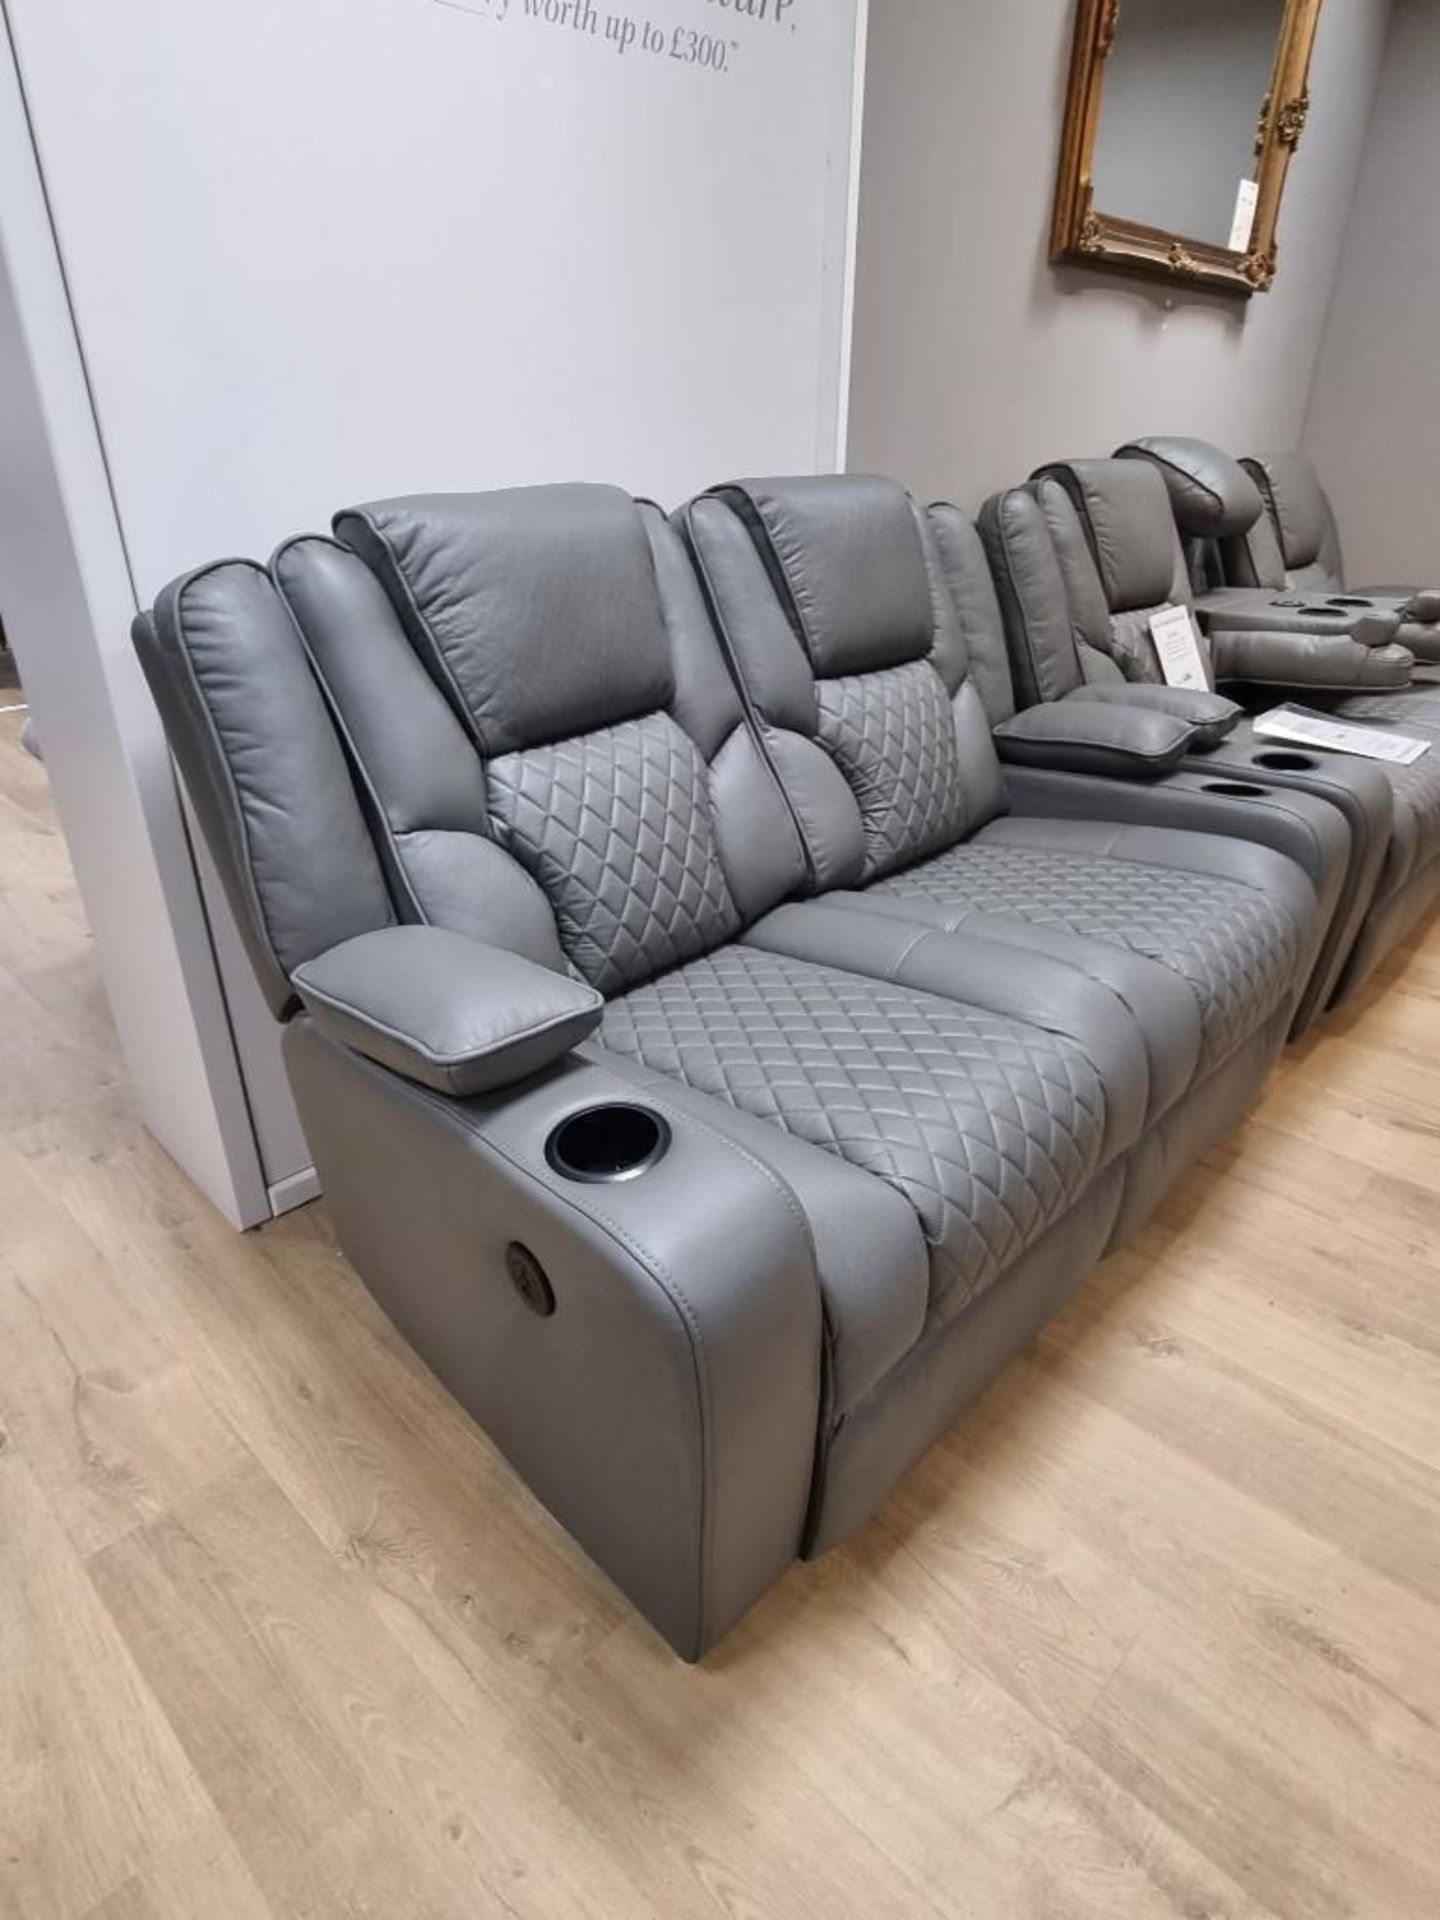 Brand new & Boxed Bentley 3 + 2 seater electric reclining sofas in Grey Leather. - Image 10 of 12